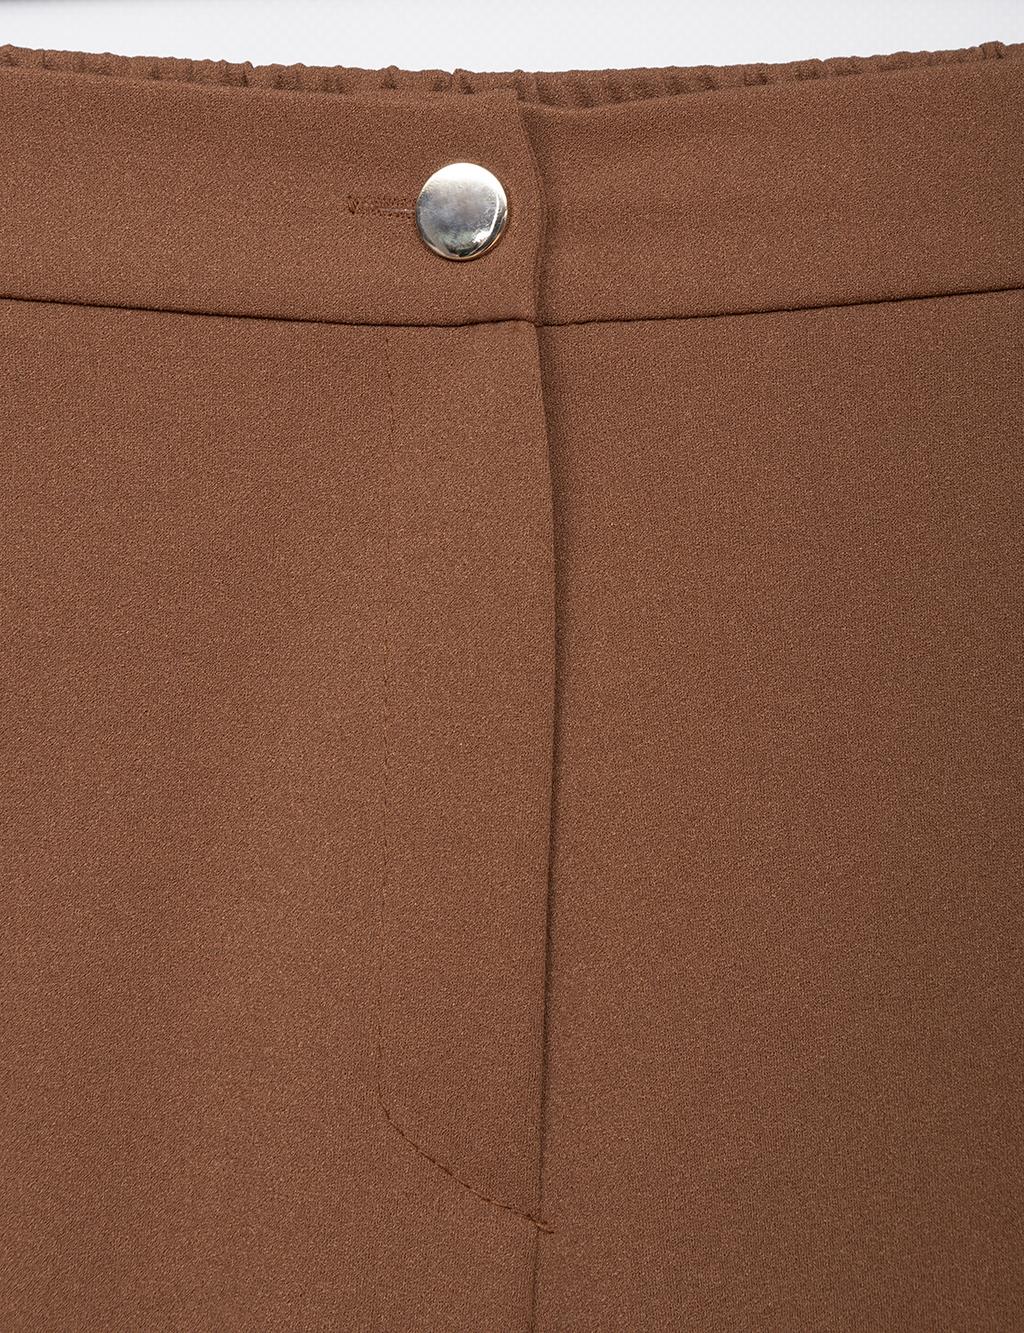  Elastic Waist Pants with Side Stripe Detail in Tobacco